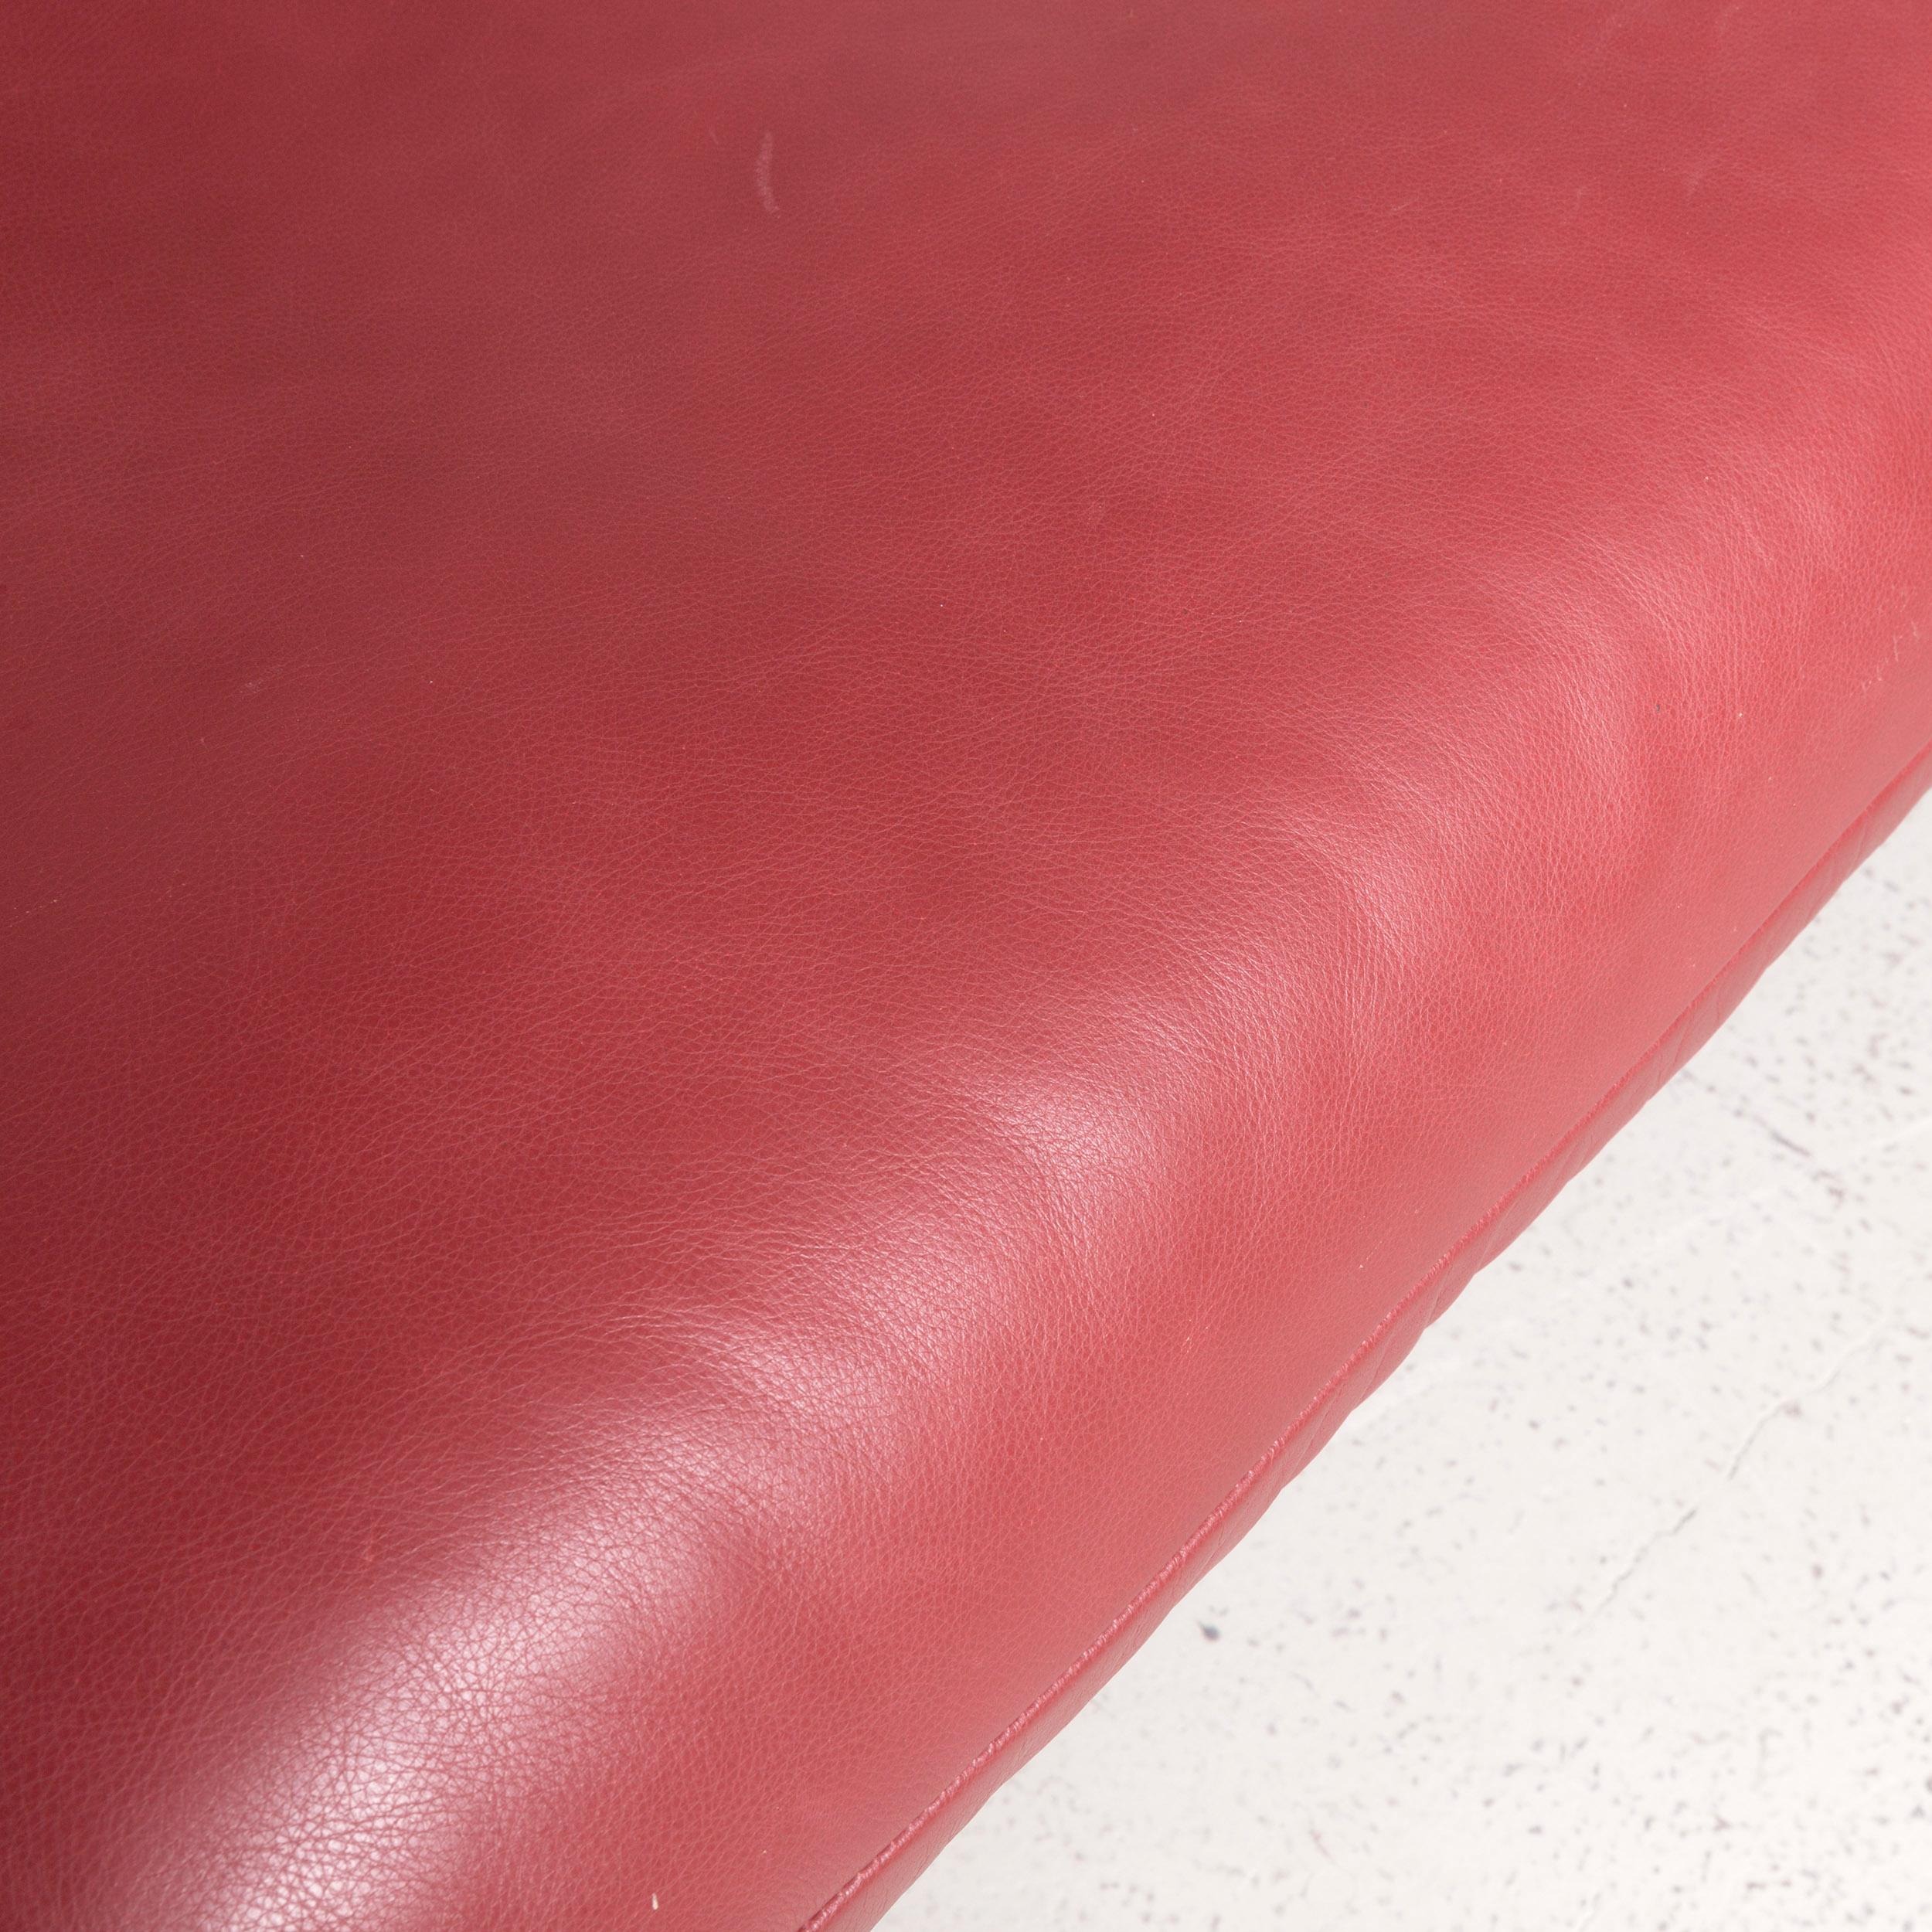 Koinor Francis Designer Leather Sofa Red Three-Seat Couch 1